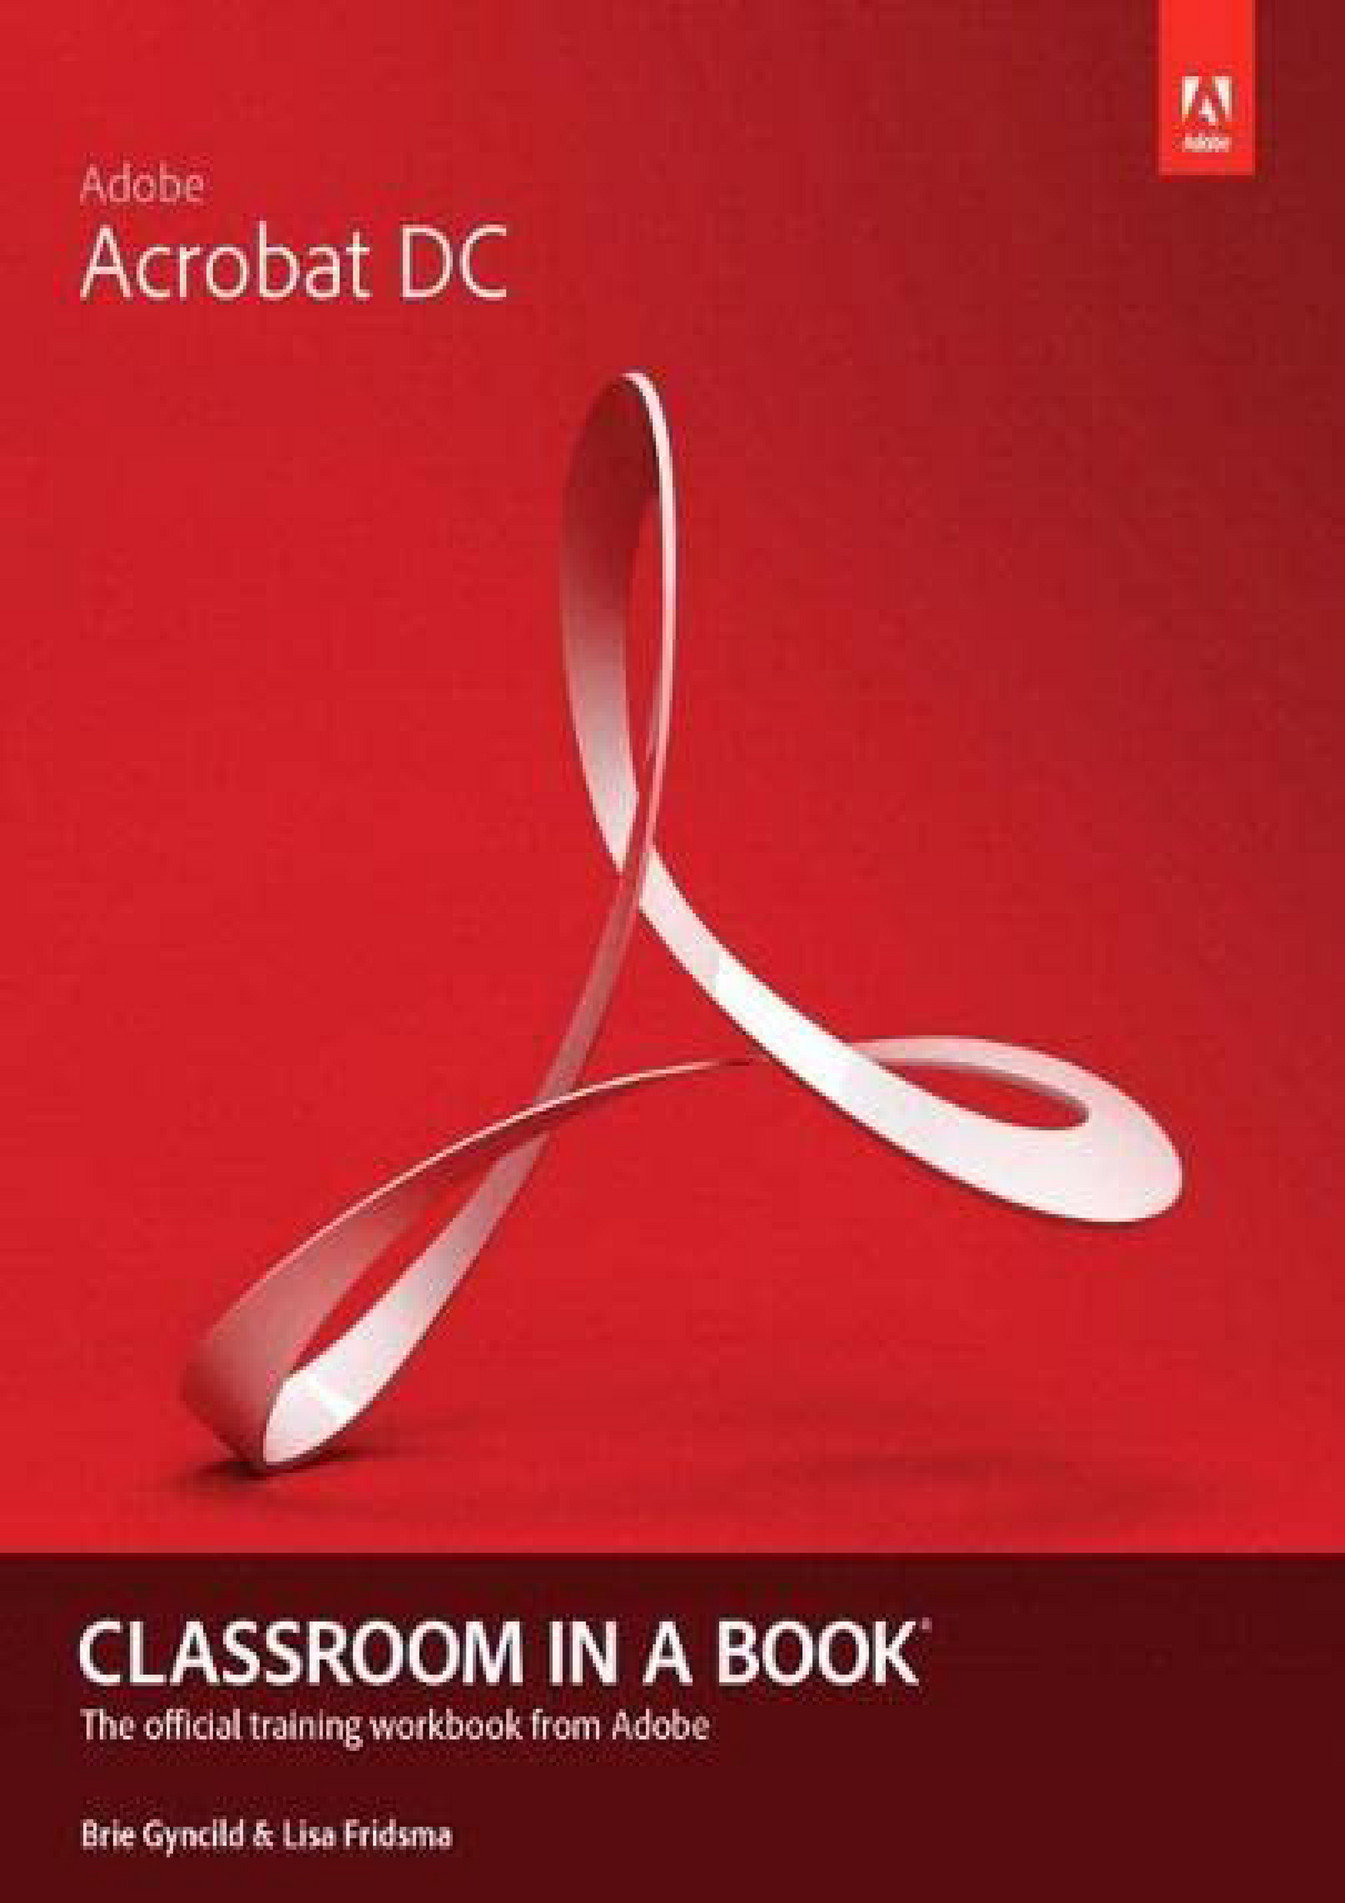 adobe acrobat x classroom in a book lesson files download